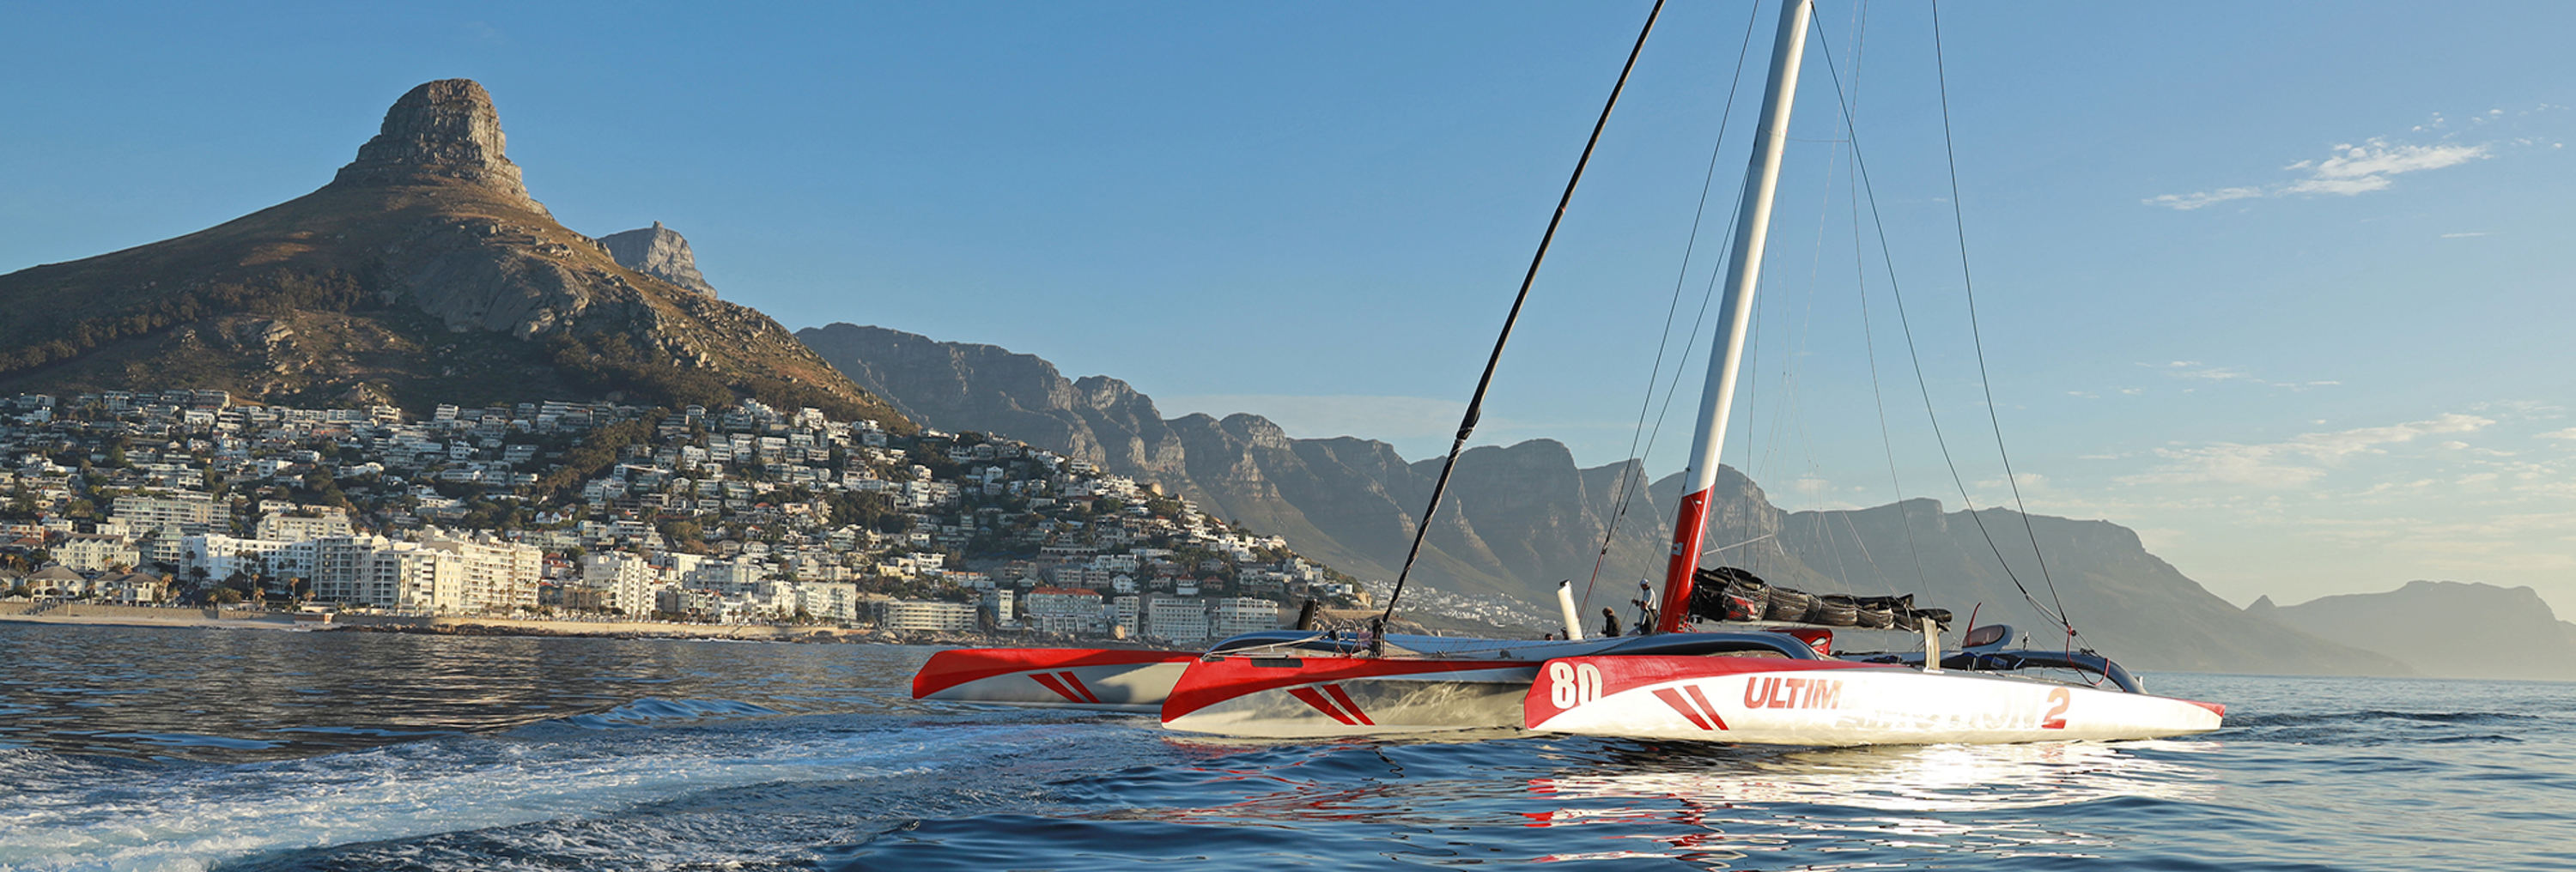 ULTIM EMOTION 2 : Available for Racing Charter